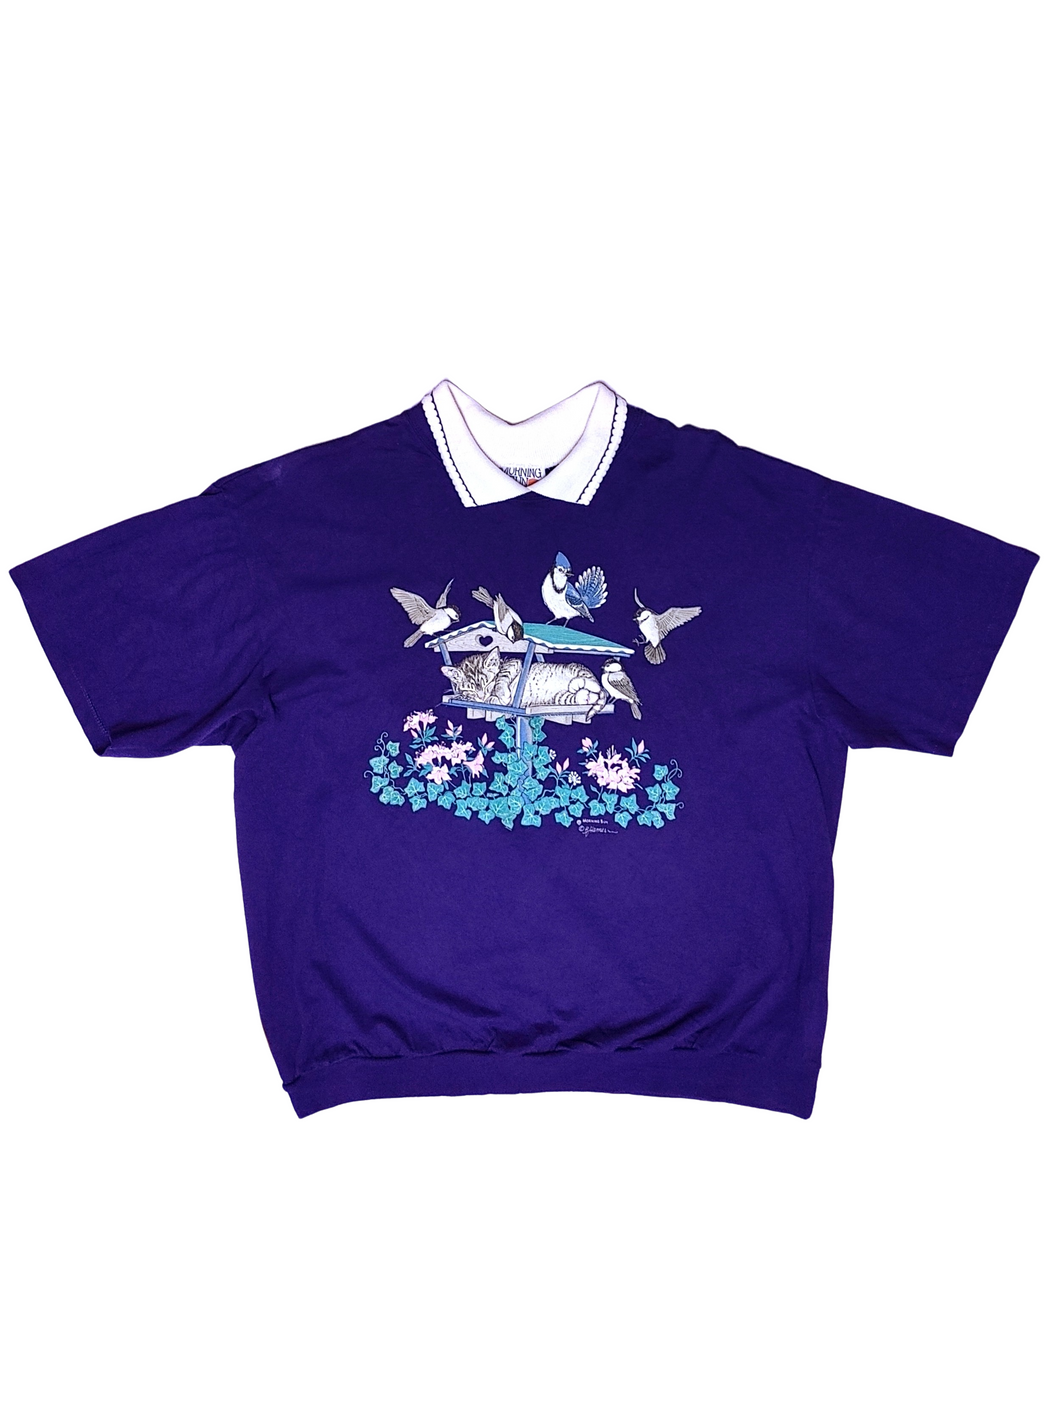 80s Cutie Birds and Kitty T-Shirt with Collar - Size XL